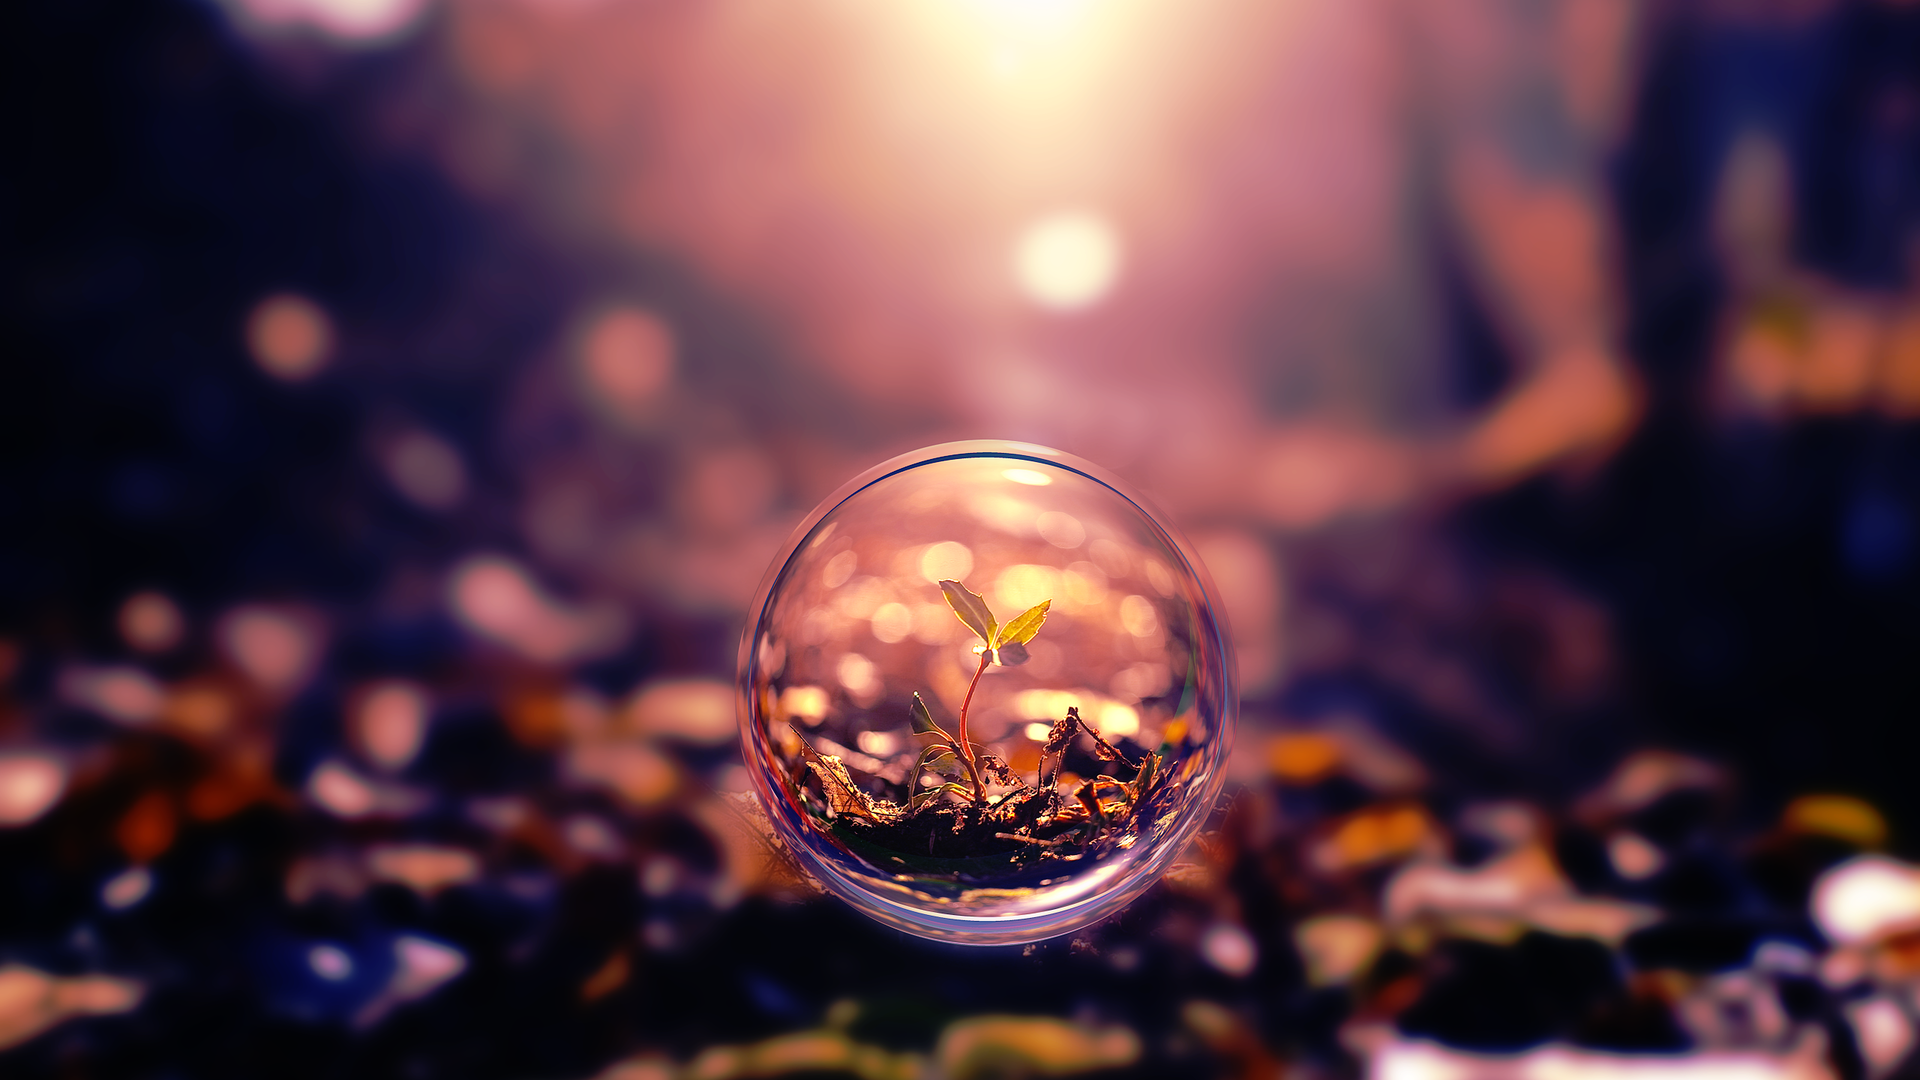 Bubbles HD Wallpapers High Quality 